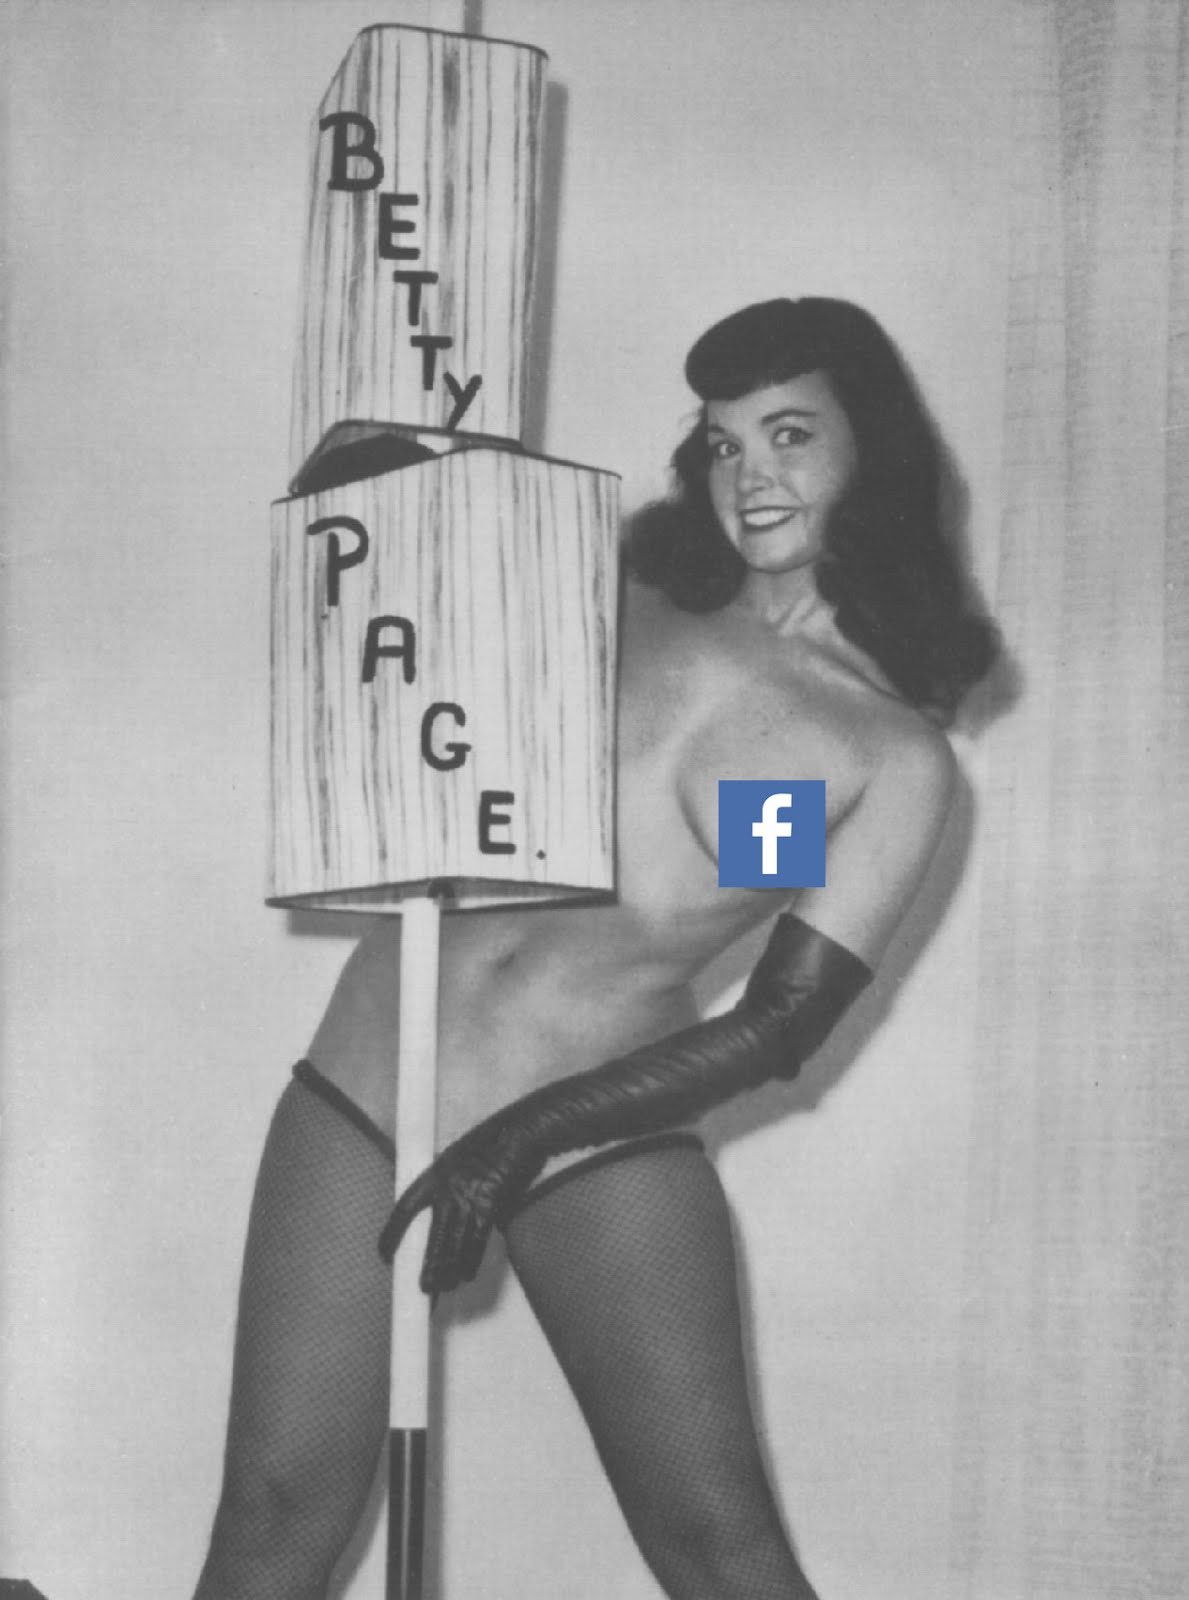 Betty page uncensored - 🧡 Bettie page uncensored 🔥 Bettie Page Nude.